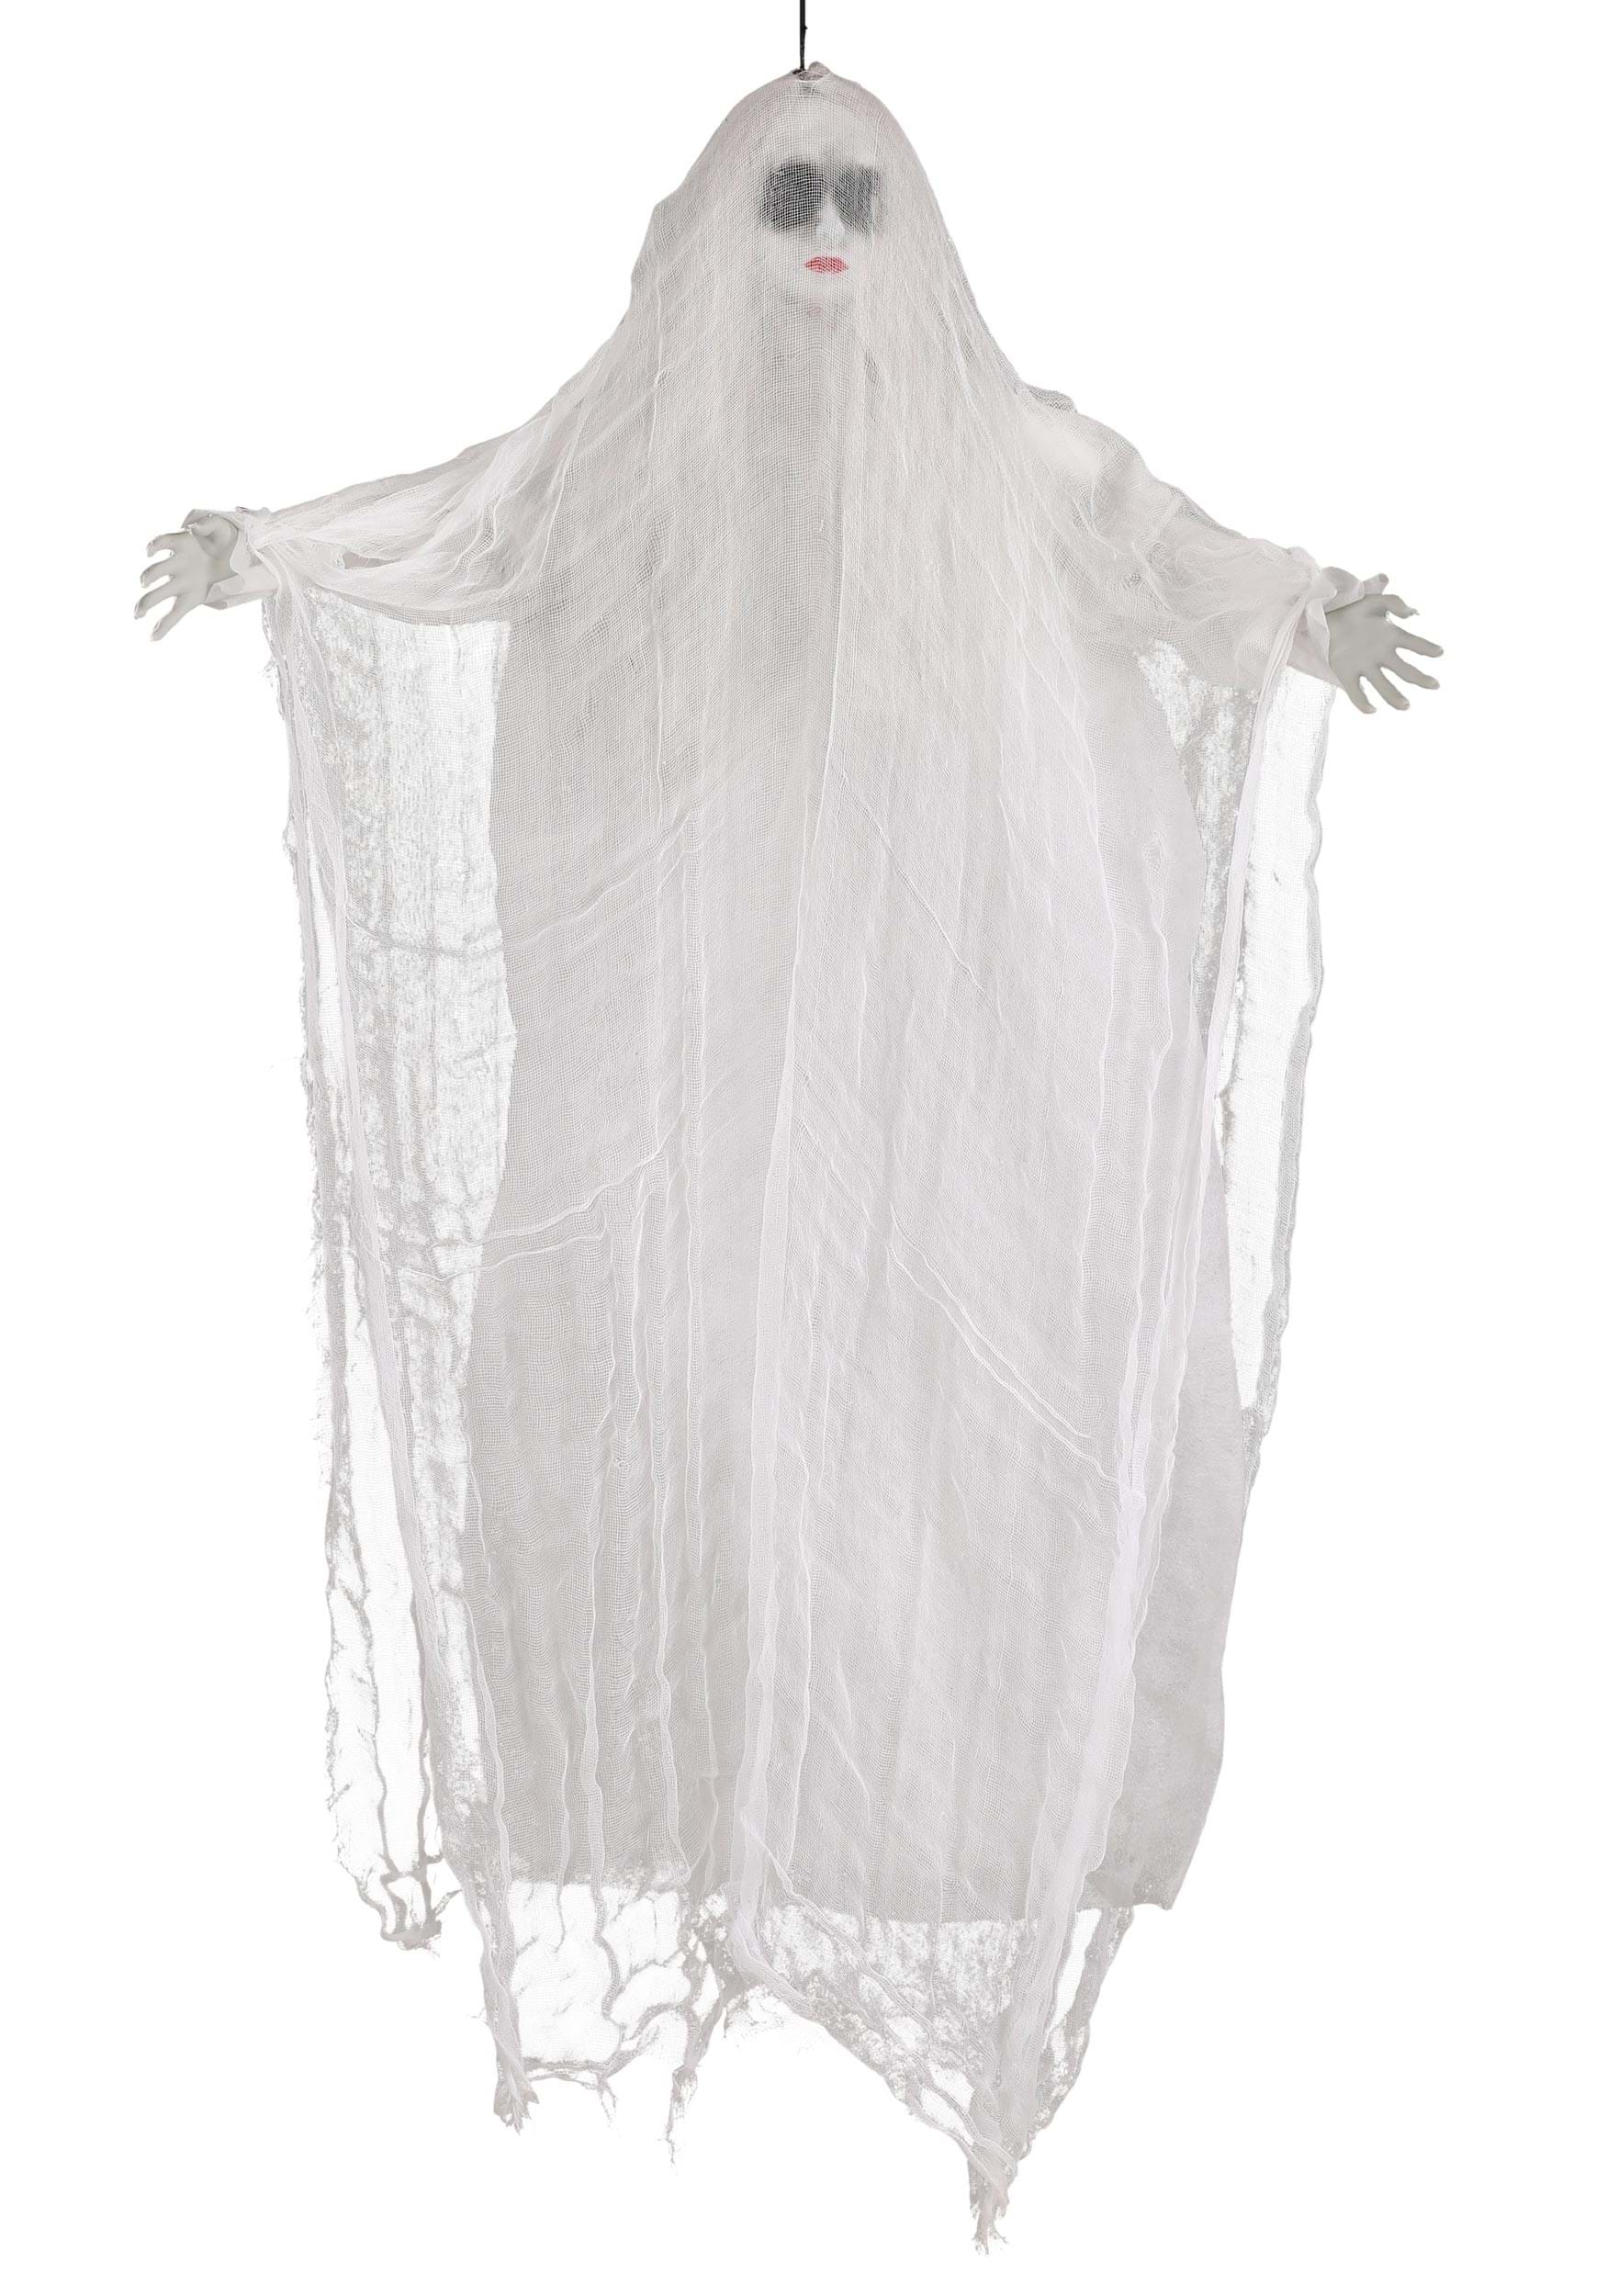 Photos - Other interior and decor GHOST FUN Costumes 3 Foot Female  Hanging Prop |  Decorations Black 